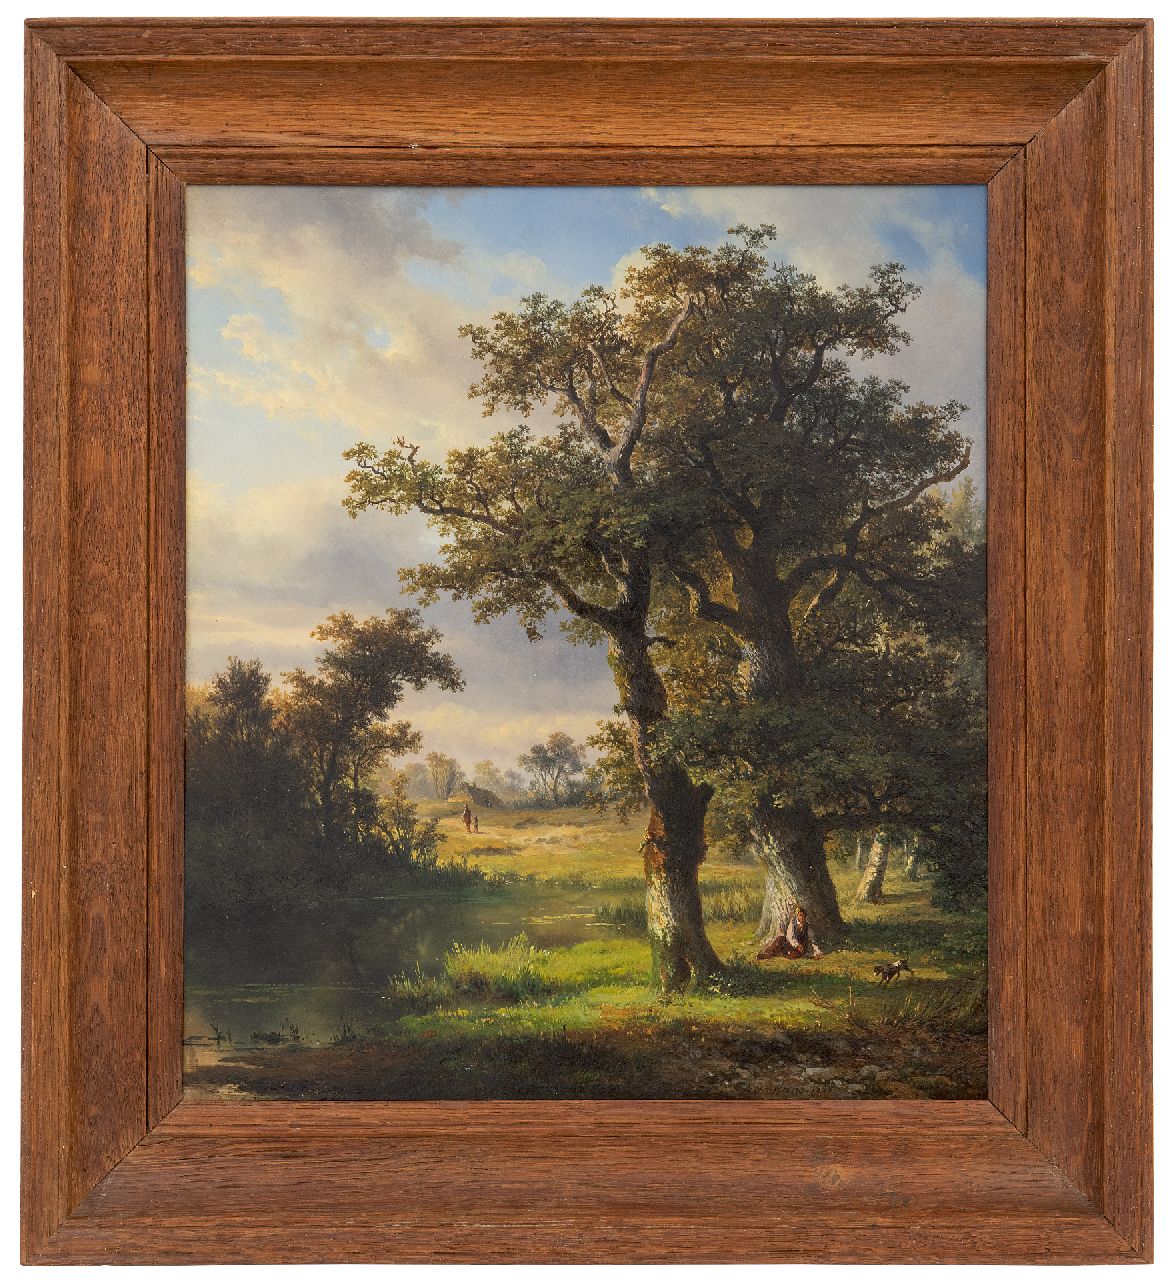 Ortmans F.A.  | François Auguste Ortmans | Paintings offered for sale | Summer landscape, oil on panel 36.2 x 31.6 cm, signed l.r. and dated 1850